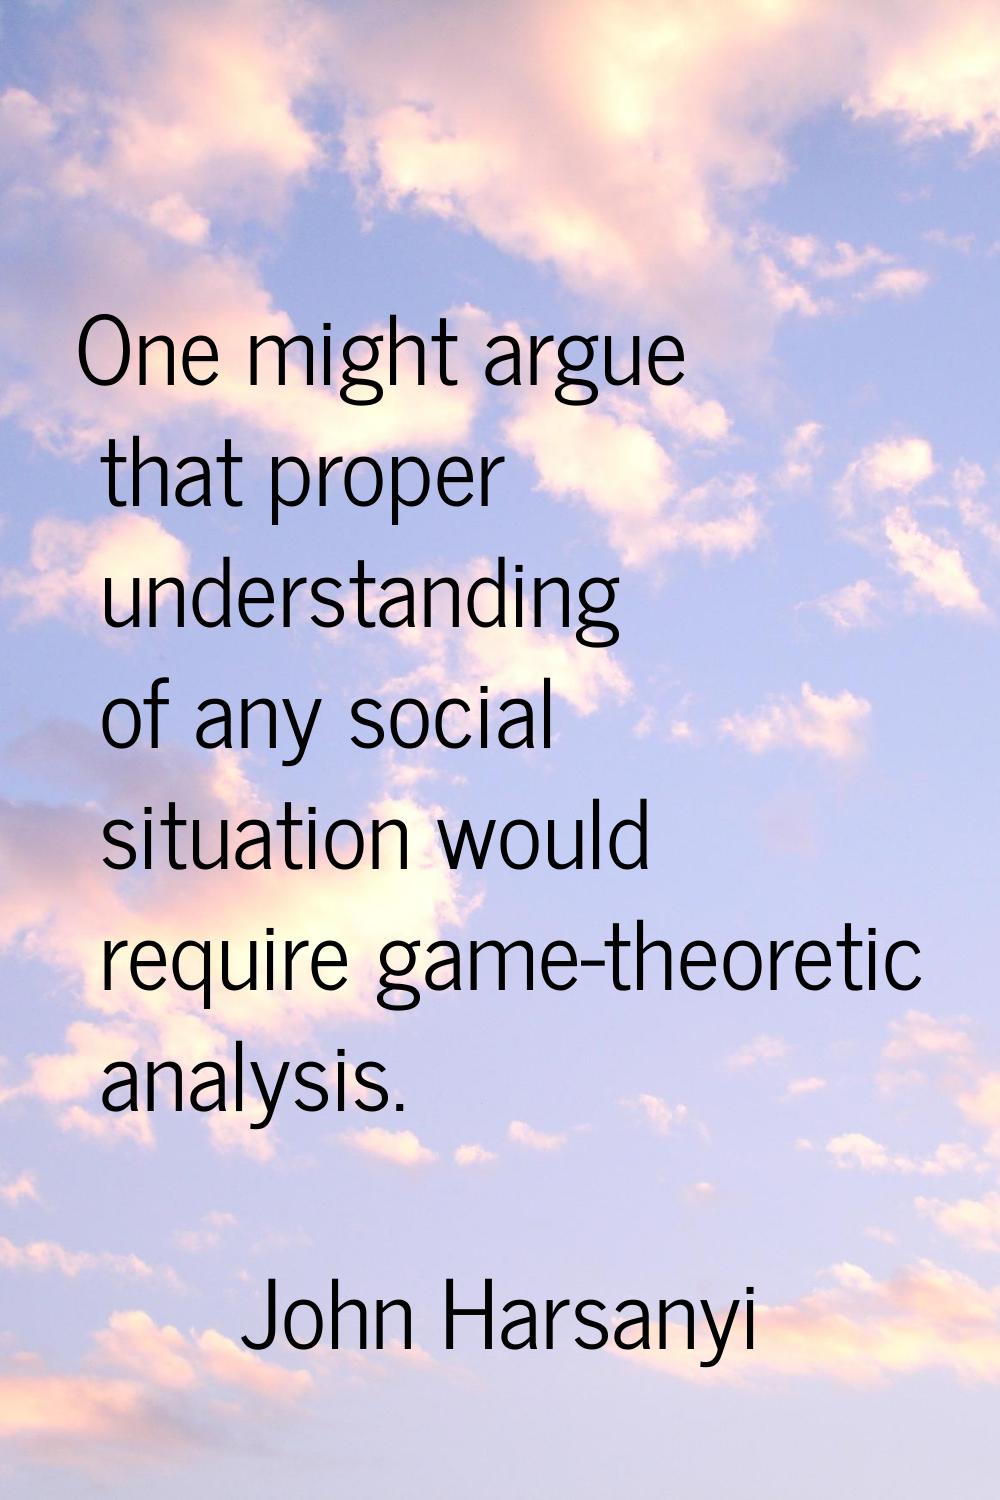 One might argue that proper understanding of any social situation would require game-theoretic anal